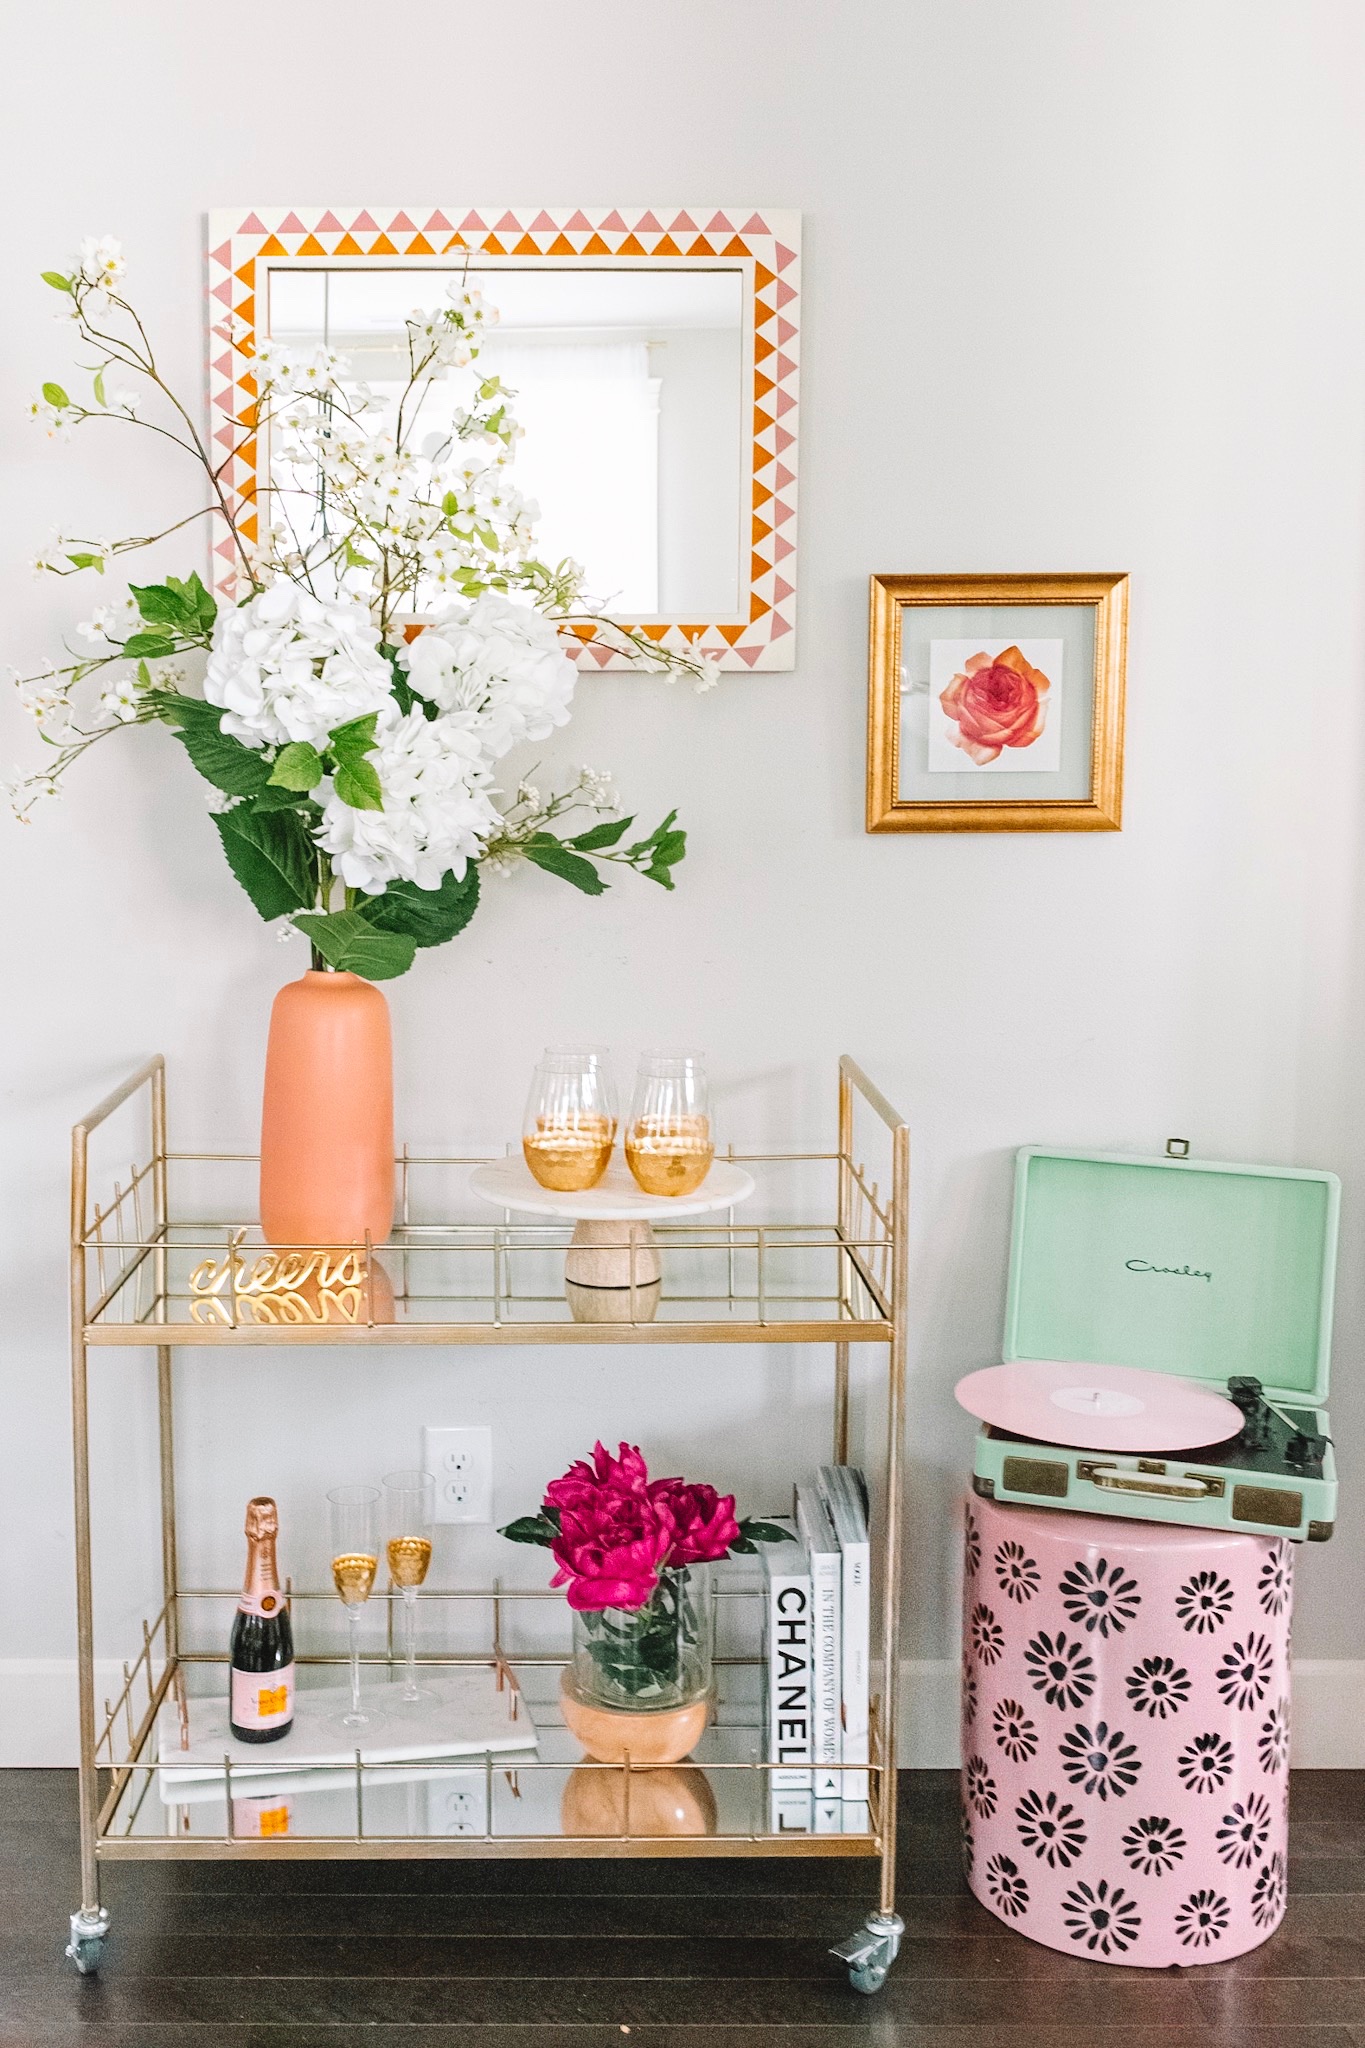 Drew Barrymore Launches Flower Home Collection with Walmart